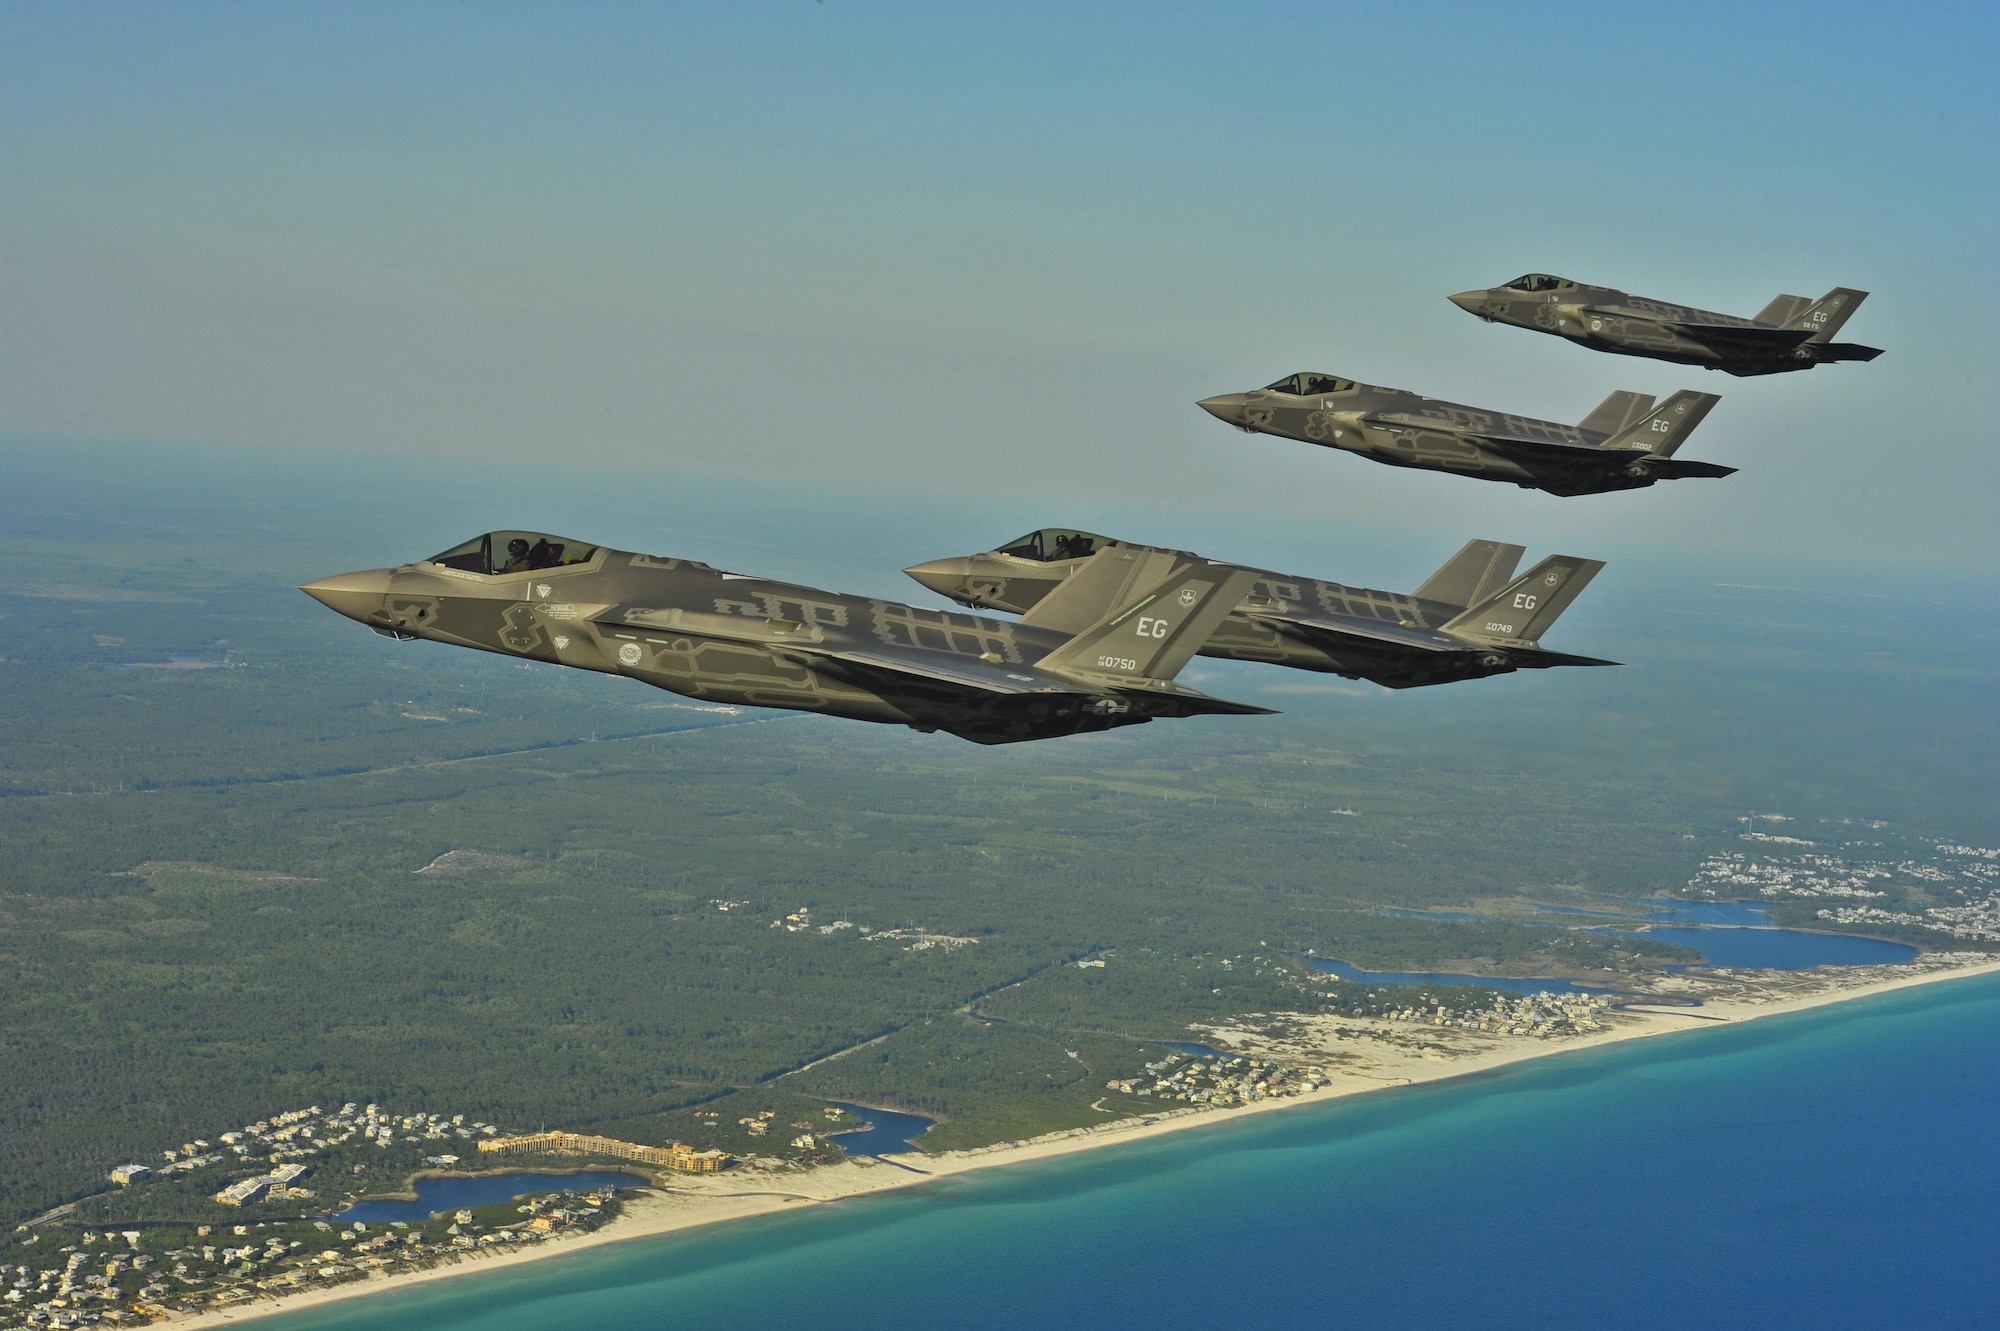 F-35A Lightning IIs from the 58th Fighter Squadron, 33rd Fighter Wing, Eglin AFB, Fla., perform an aerial refueling mission May 14, 2013, off the coast of northwest Florida. The 33rd Fighter Wing is a joint graduate flying and maintenance training wing that trains Air Force, Marine, Navy and international partner operators and maintainers of the F-35 Lightning II. (U.S. Air Force photo/Master Sgt. Donald R. Allen)